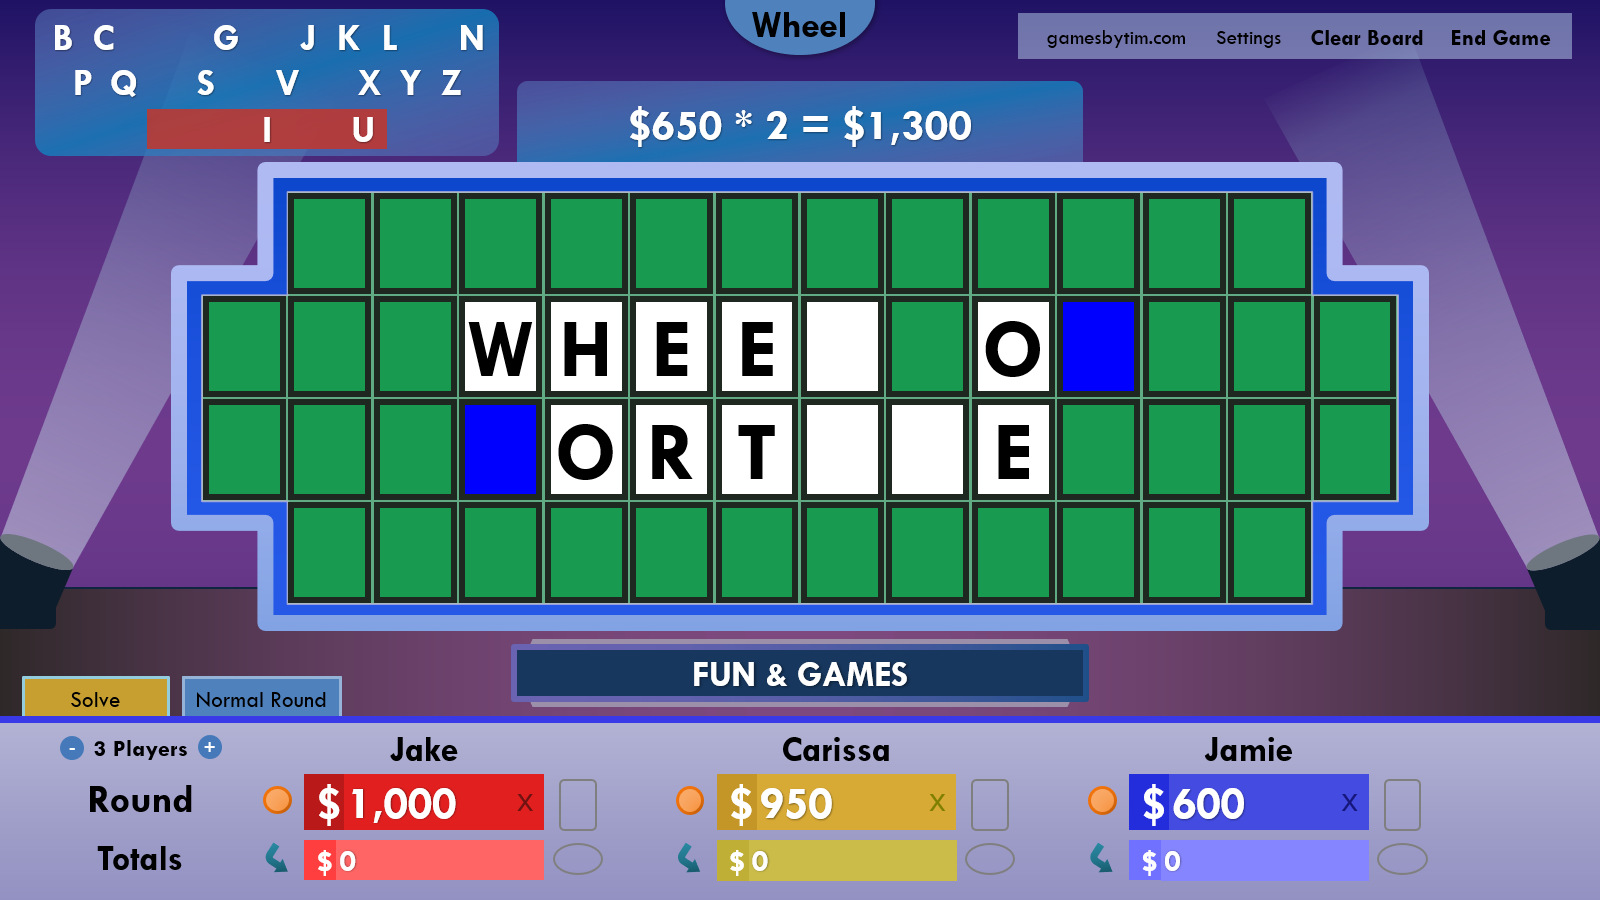 Free Wheel Of Fortune Powerpoint Game Template